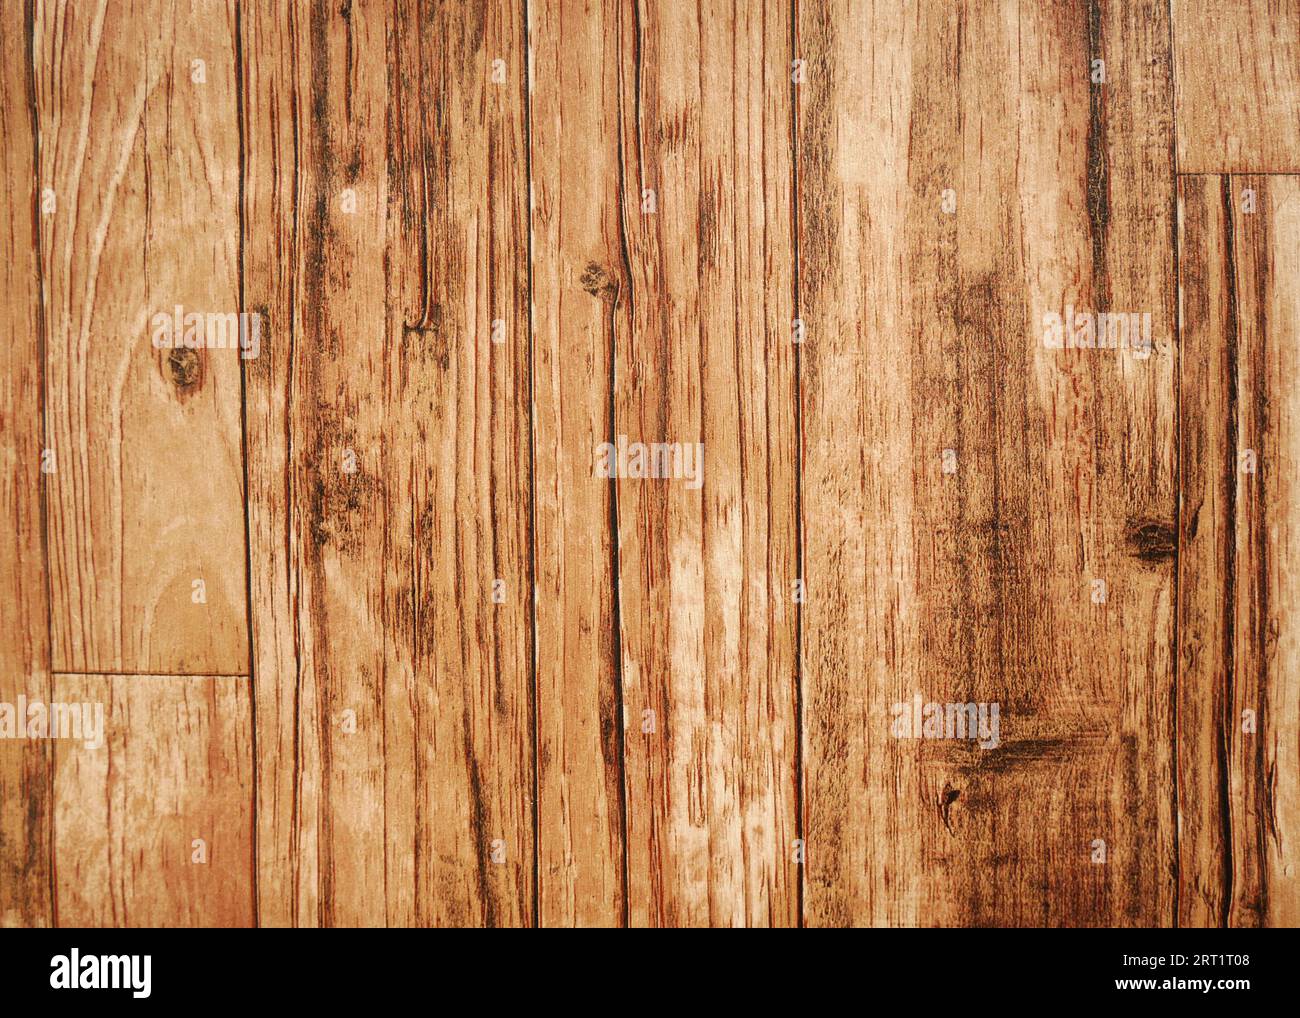 Brown wood texture background. The wood paneling has a beautiful dark pattern, the texture of hardwood floors. Stock Photo